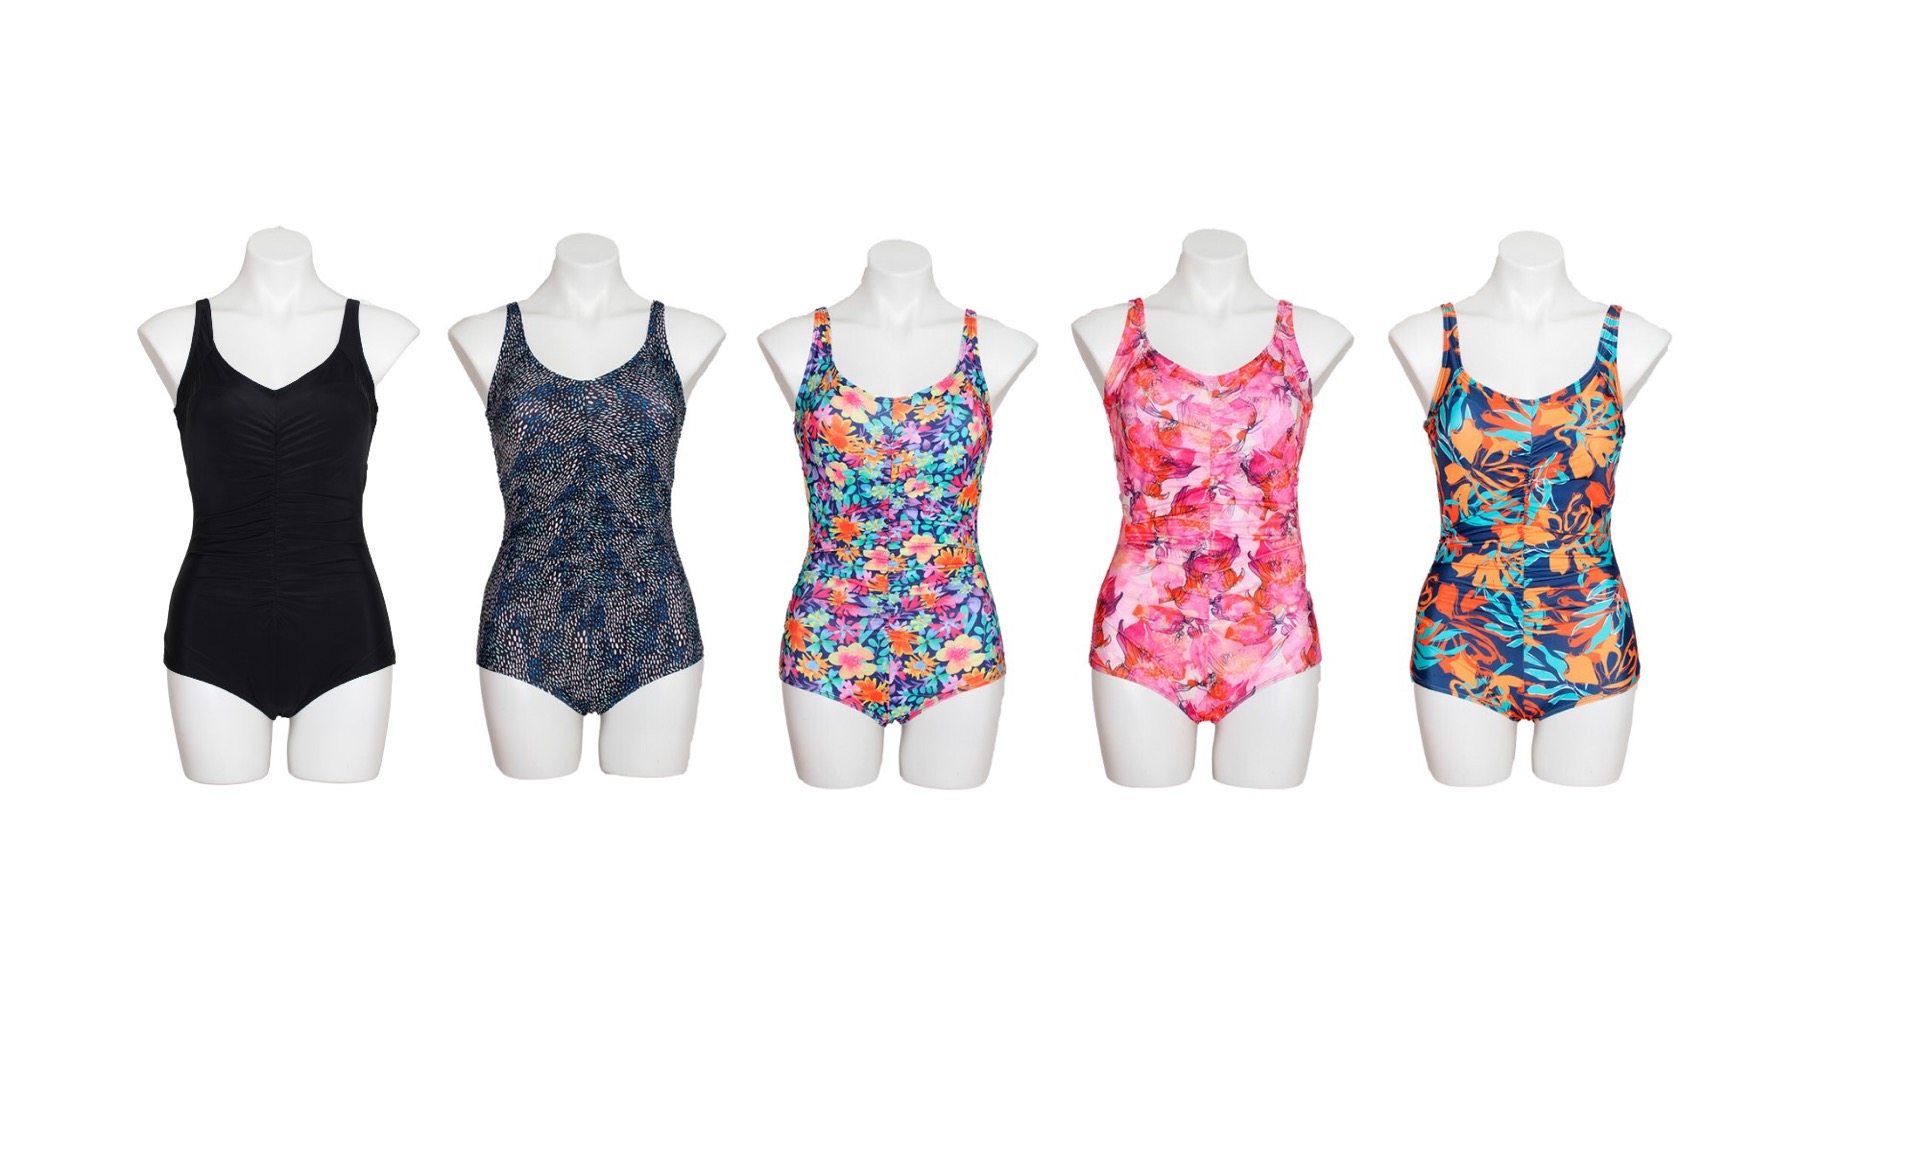 ''Women's Printed One-Piece Fashion Swimsuits w/ Shirred Front - Tropical Floral, Palm Tree, & Solid 